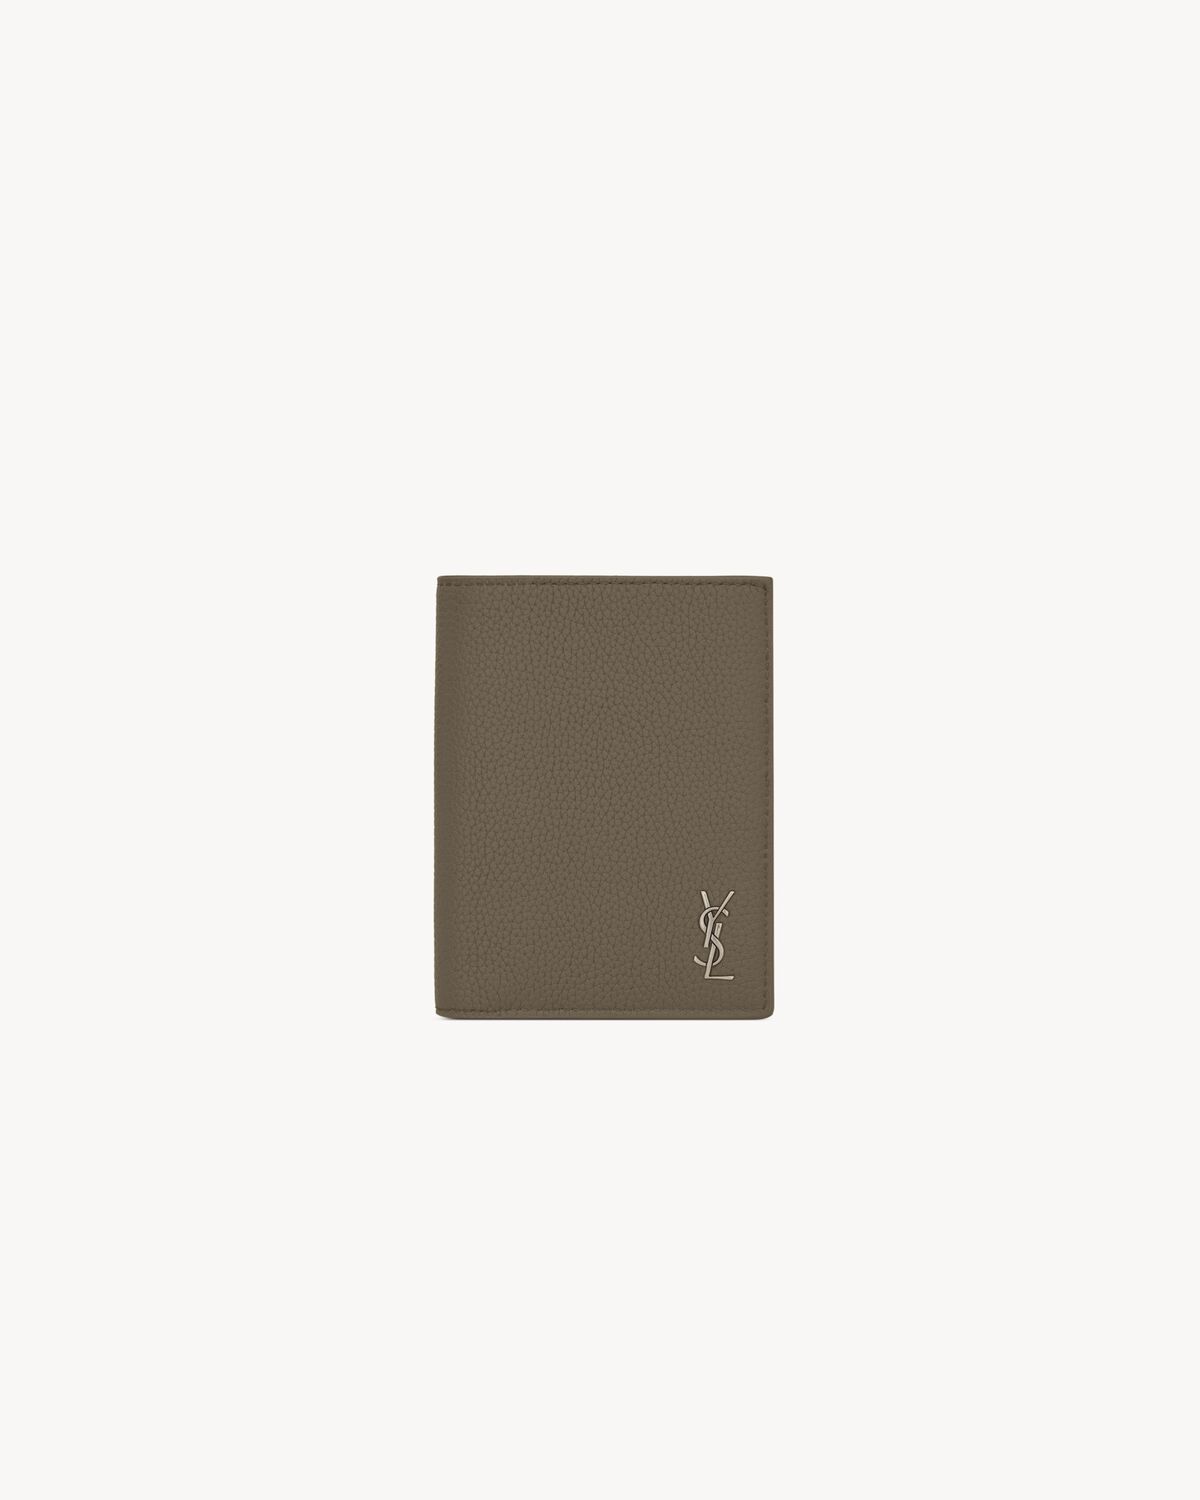 TINY CASSANDRE CREDIT CARD WALLET IN GRAINED LEATHER